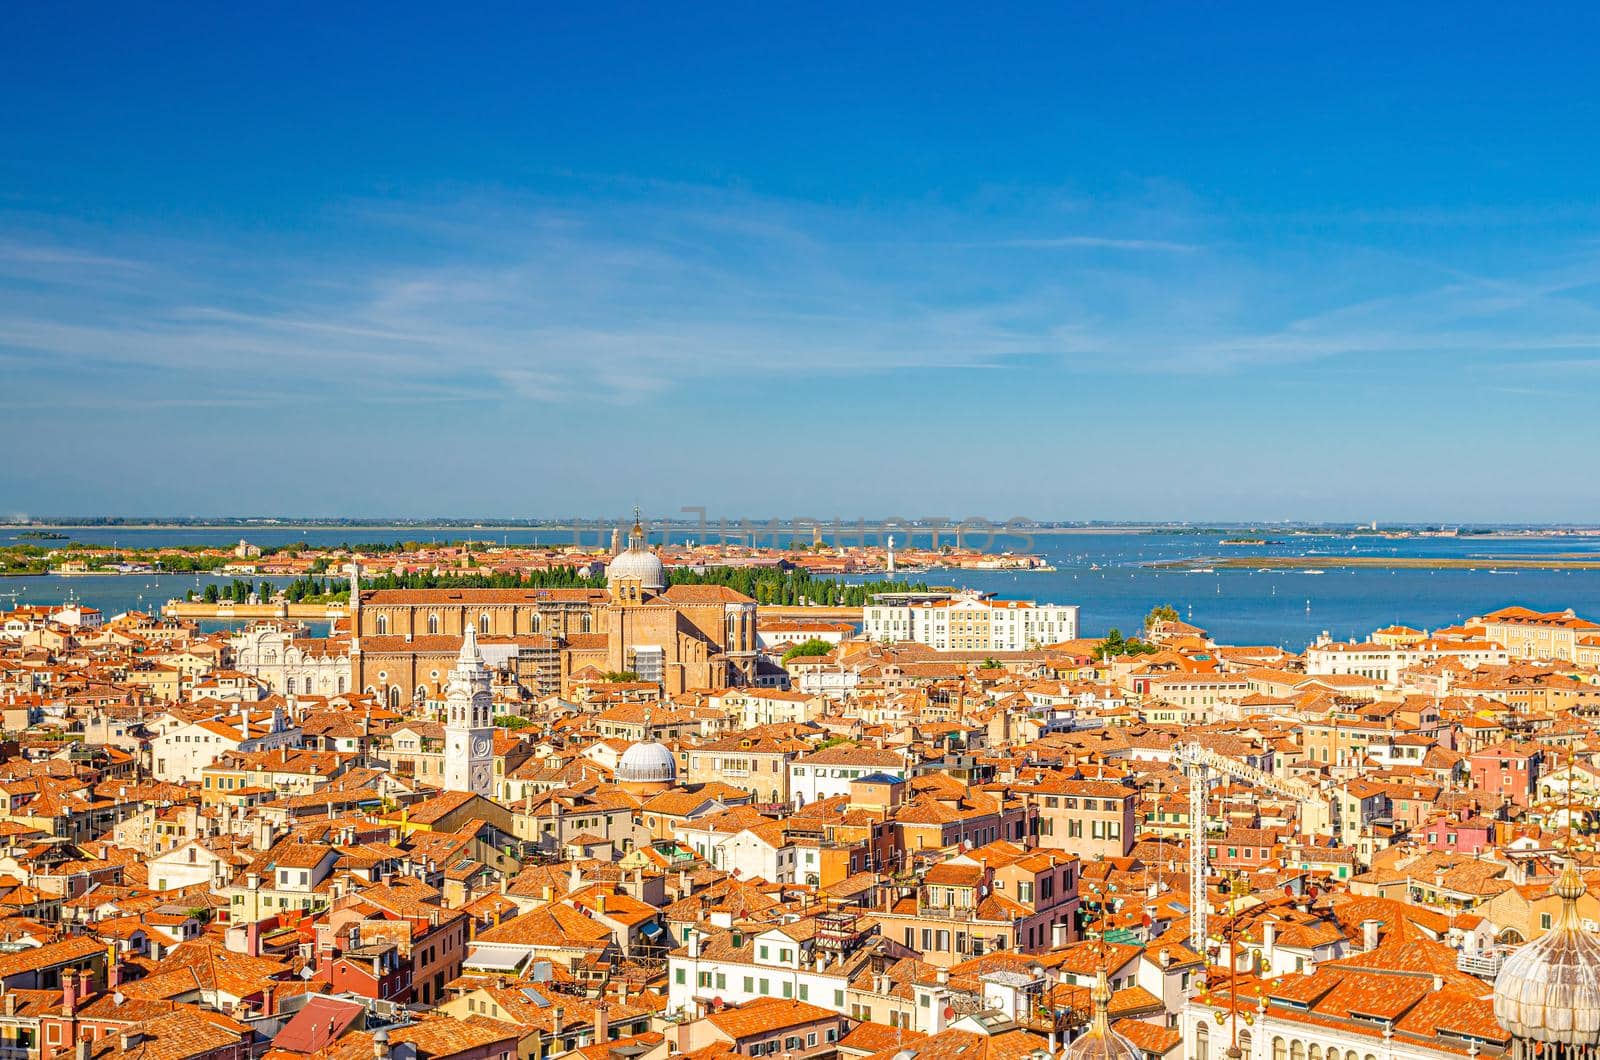 Aerial panoramic view of Venice city historical centre with old buildings red tiled roofs, Basilica dei Santi Giovanni e Paolo and islands of Venetian Lagoon, Veneto Region, Italy. Venice cityscape.